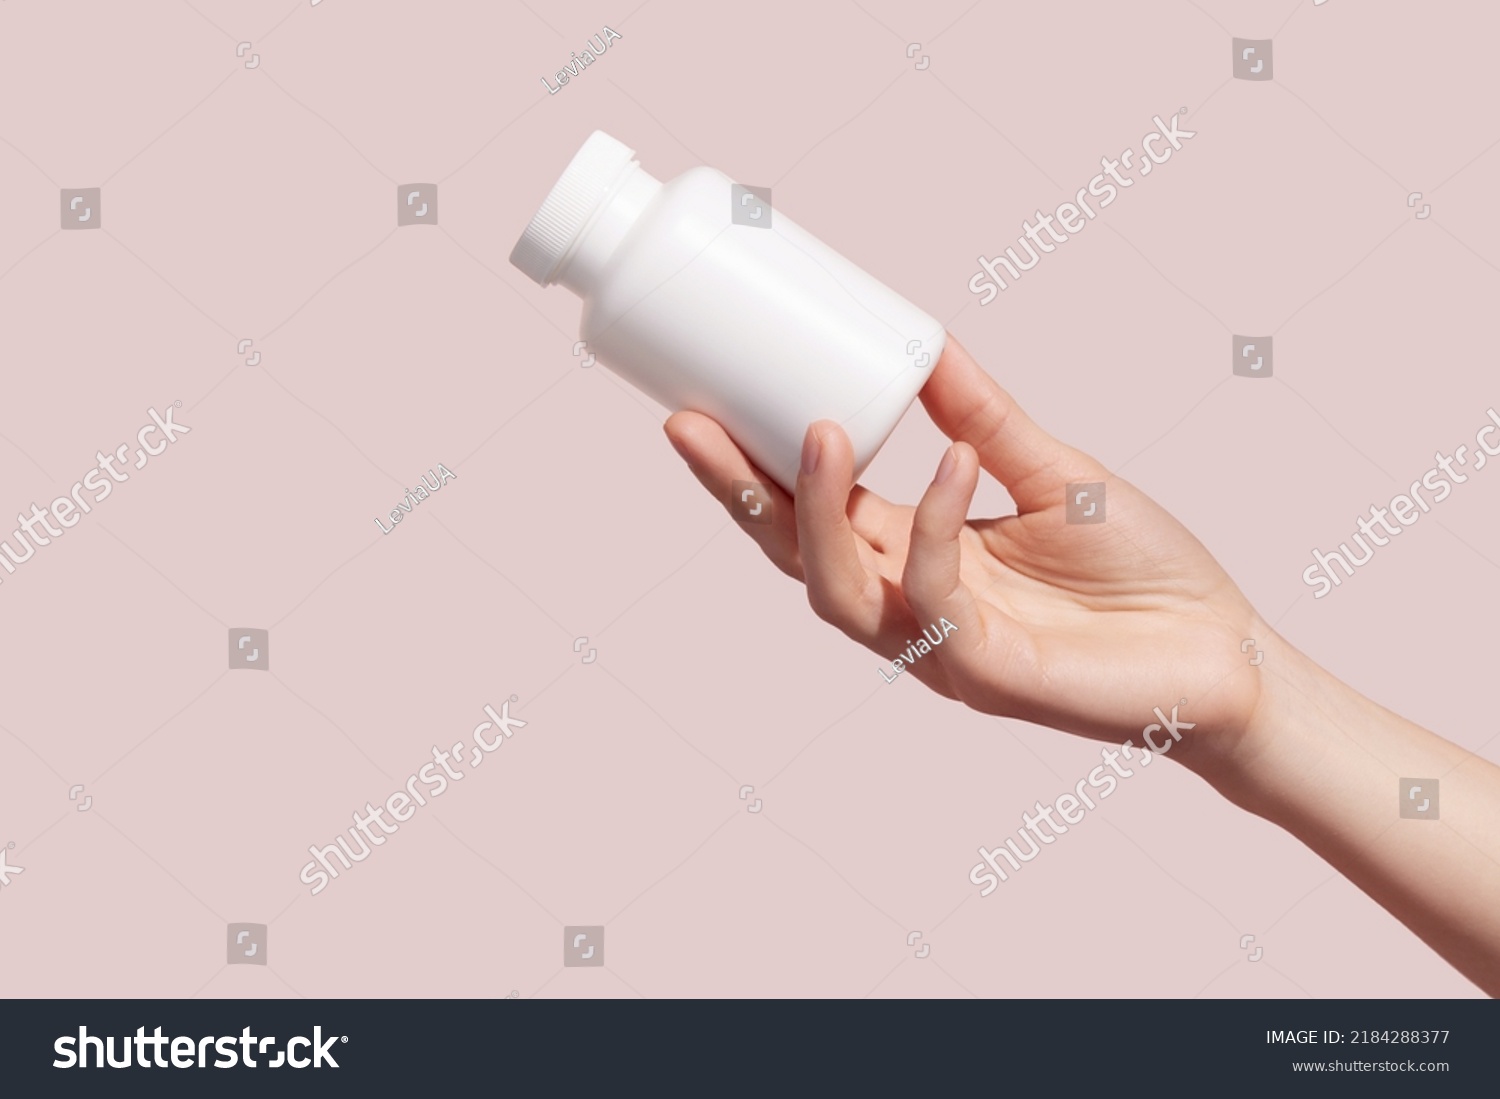 Female hand holding blank white squeeze bottle plastic tube on pink background. Packaging for pills, capsules or supplements. Mockup. High quality photo #2184288377